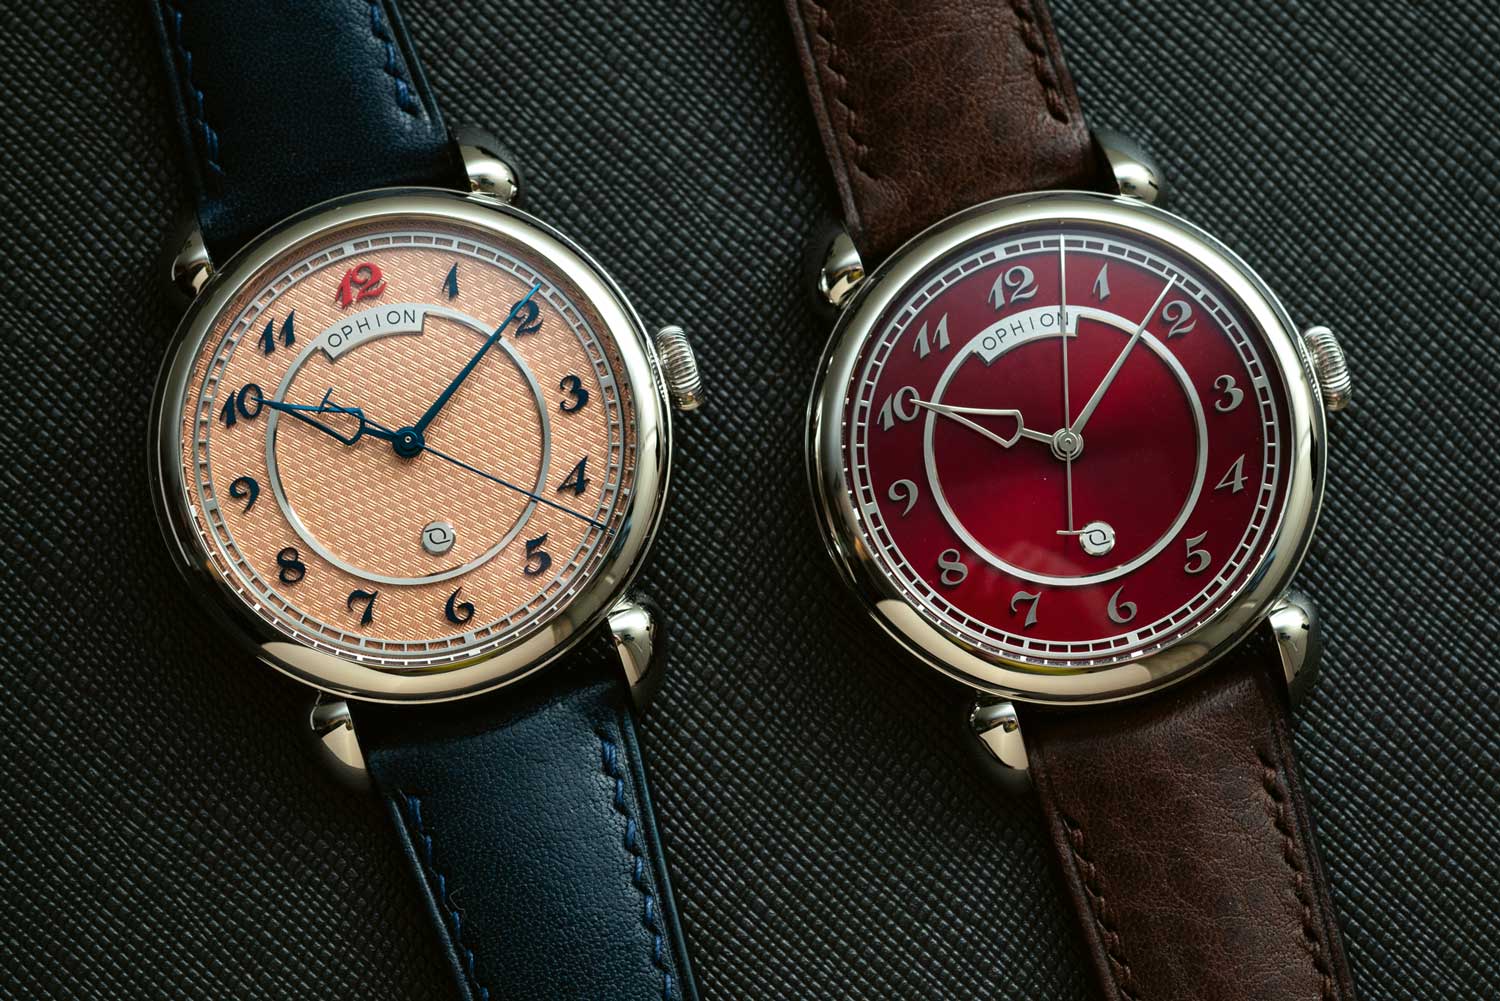 OPH 786 Vélos Singapore Limited Editions with Salmon Red dial (left) and Radial Red dial (right)